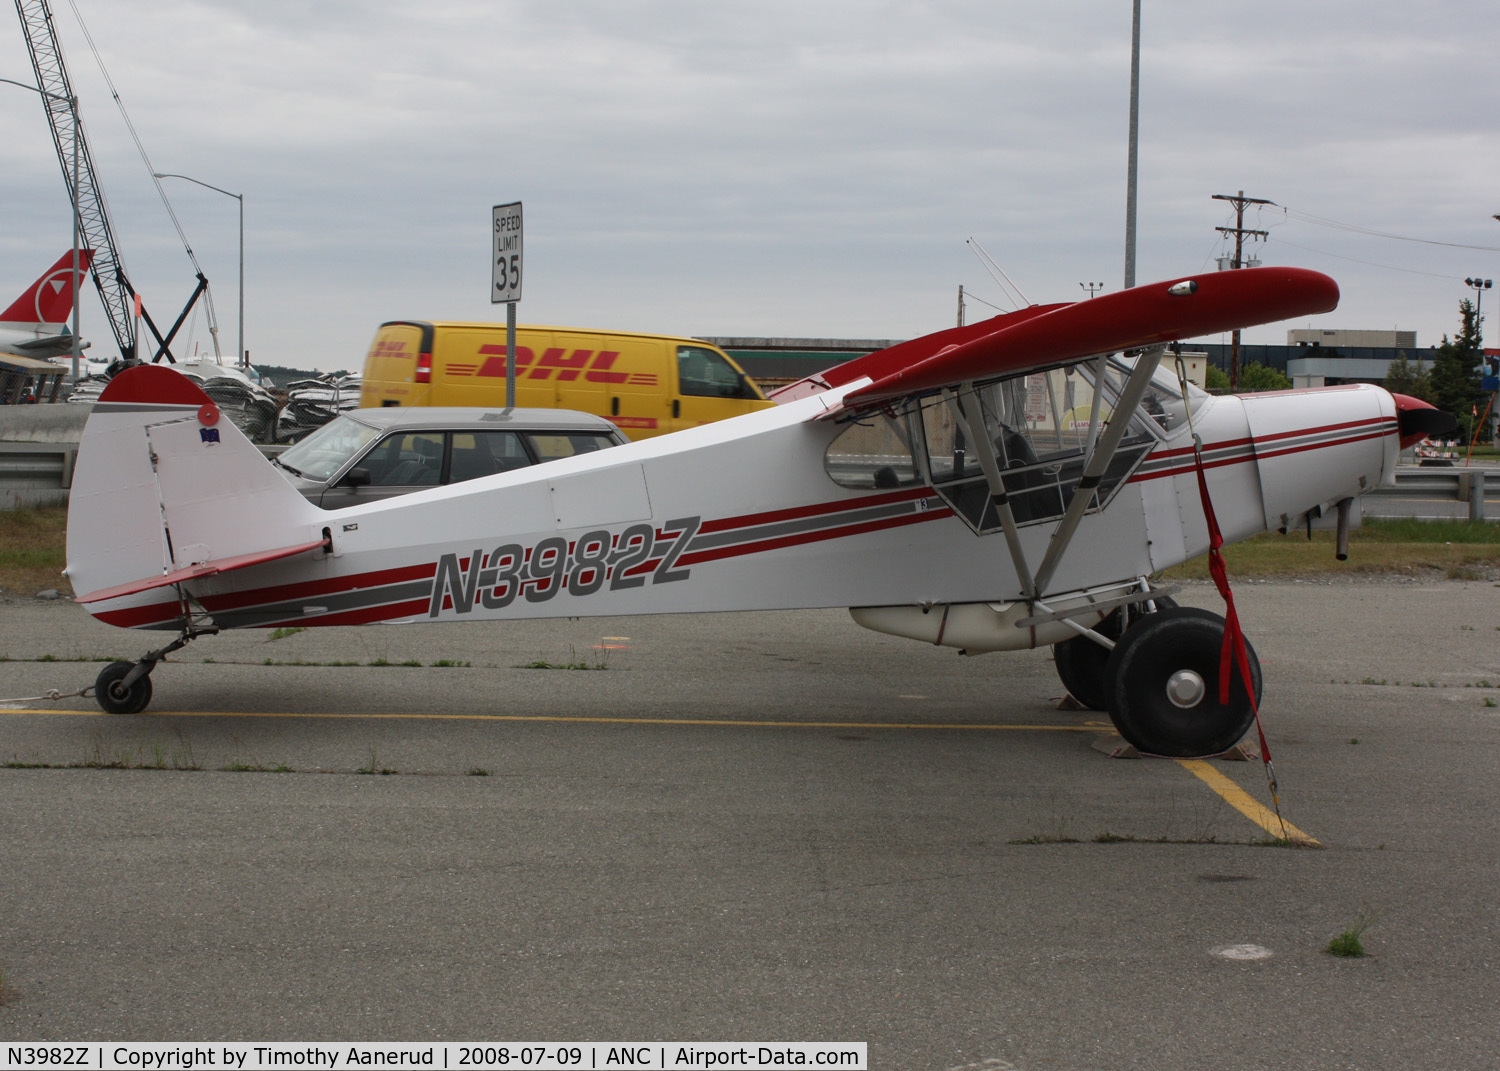 N3982Z, 1963 Piper PA-18S-150 Super Cub C/N 18-7925, General Aviation parking area at Anchorage